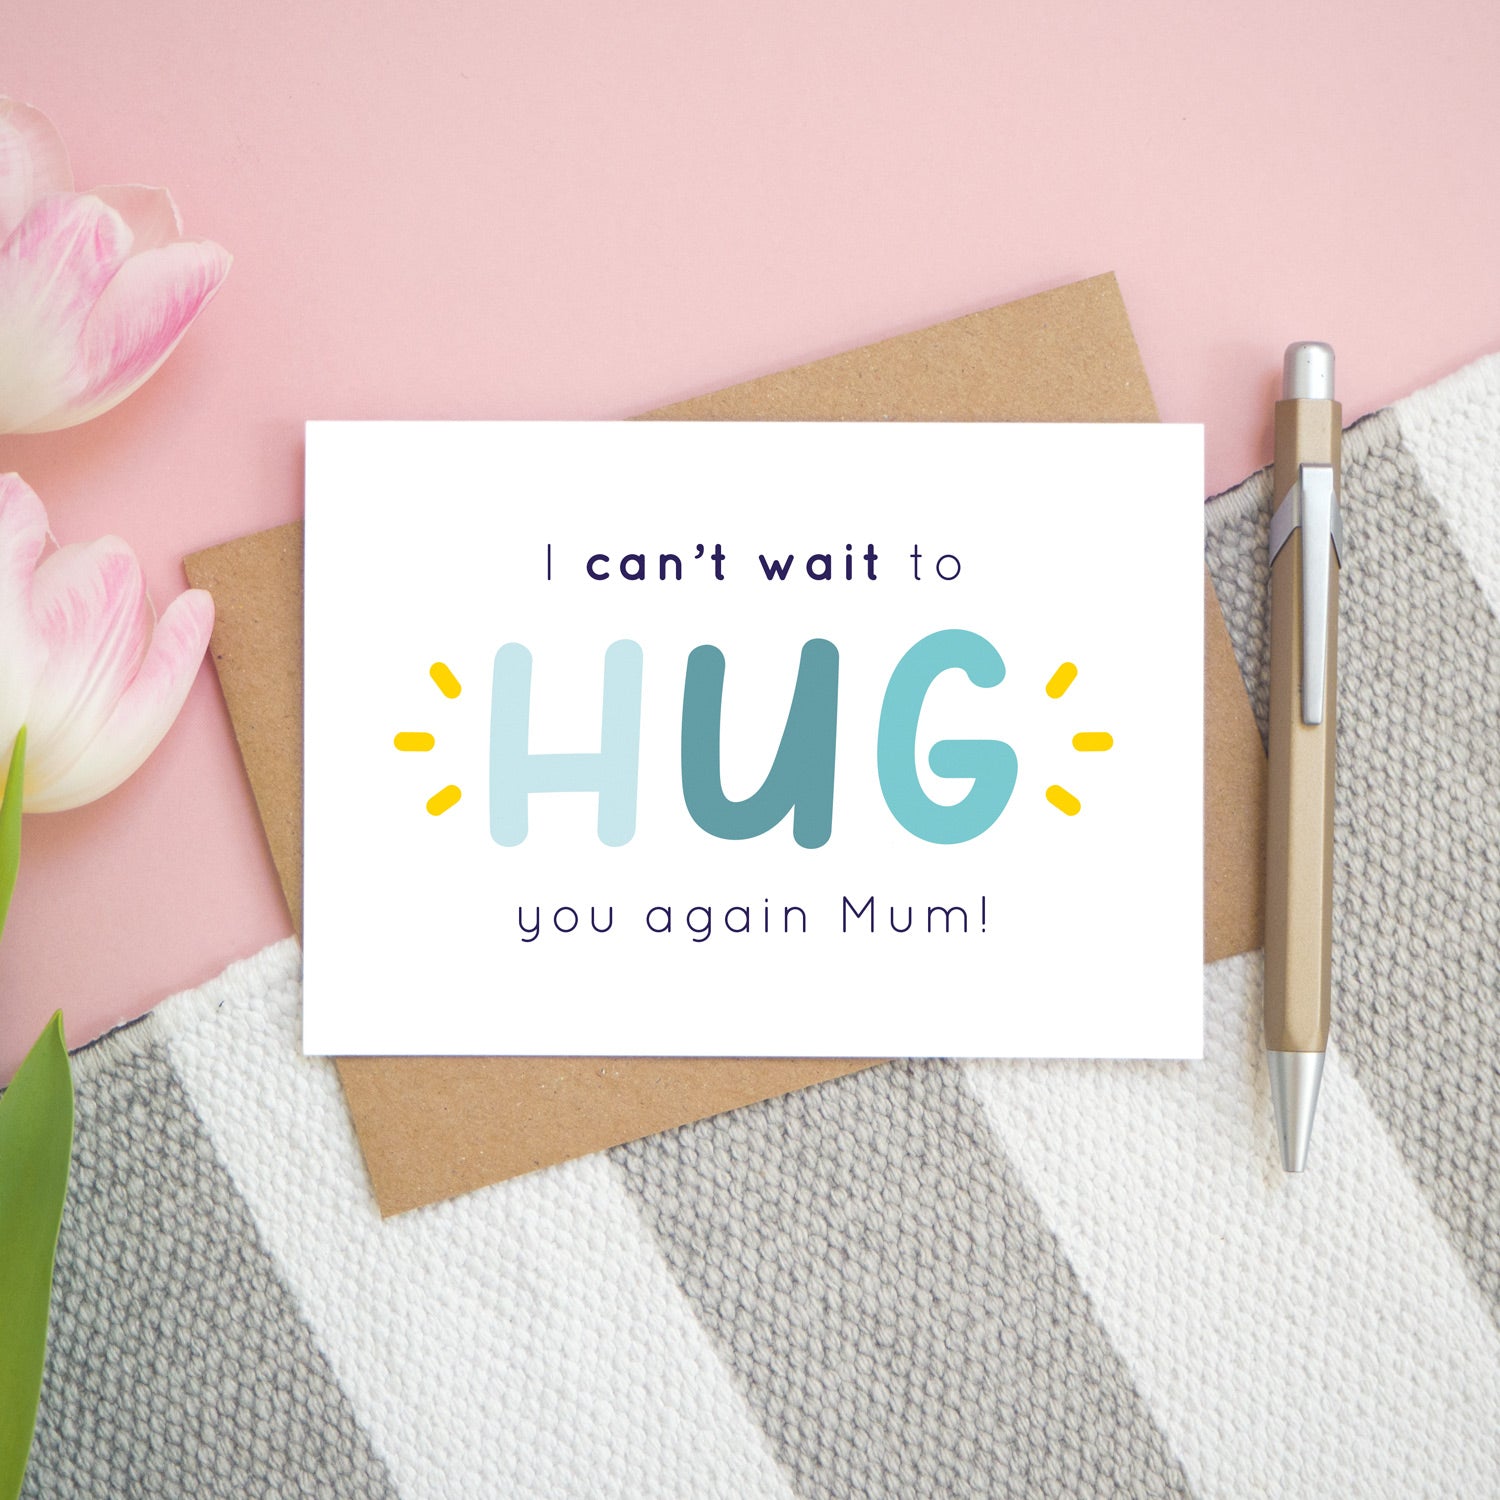 This is the personalised option of the 'I can't wait to hug you again' card with the sample name of 'Mum'. There is a pen to the right for scale and has been photographed on a pink, and grey & white striped background.